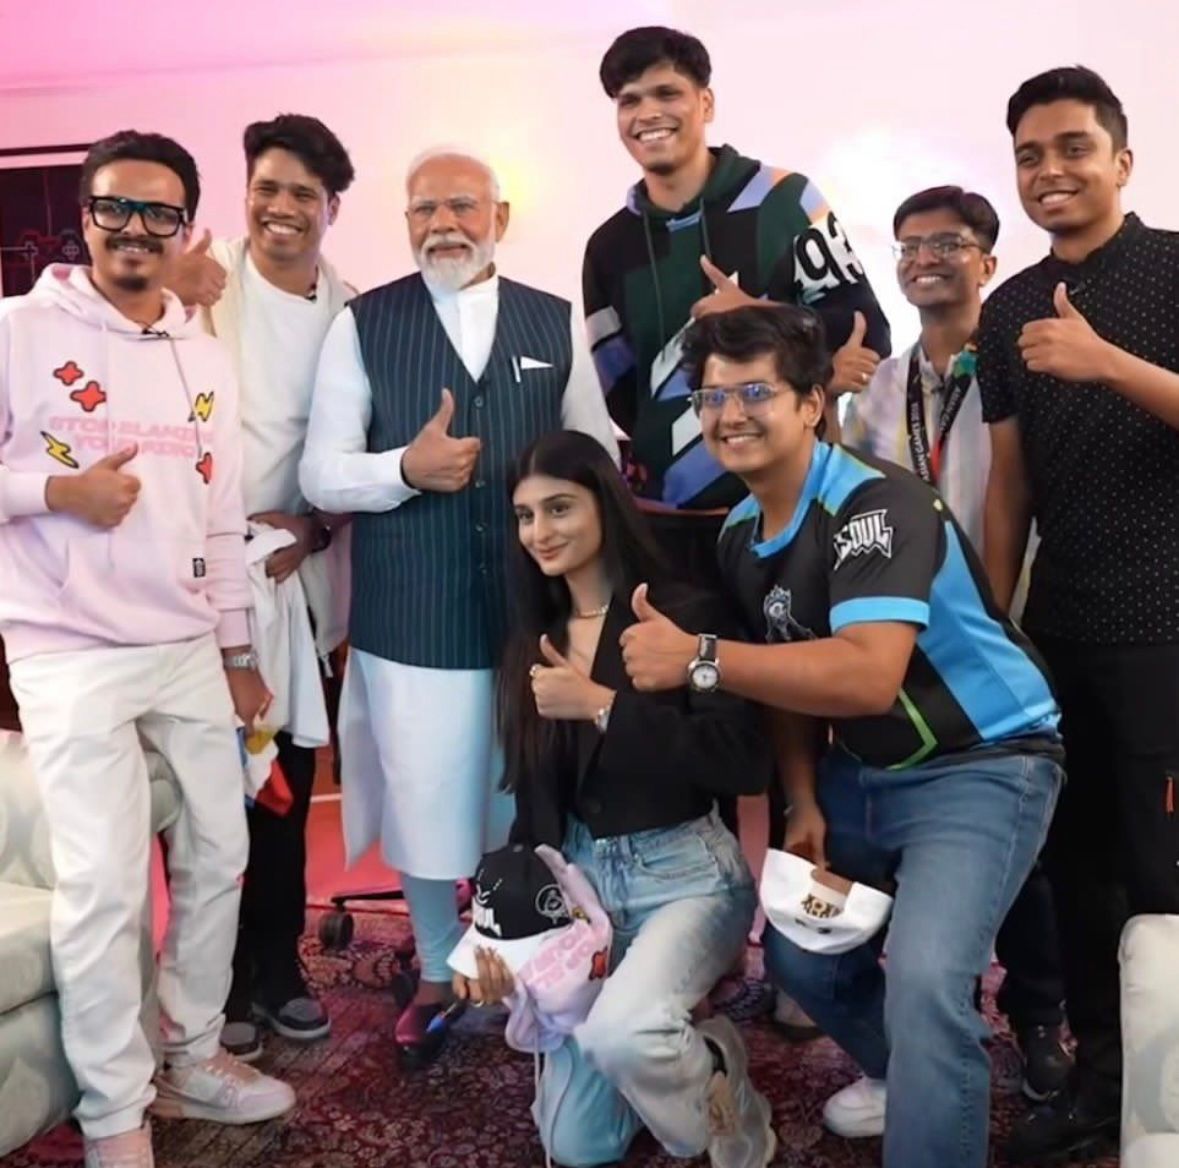 Honored by PM Narendra Modi's recognition of India's gaming industry. Join us at IDGS as we shape the future of gaming in India and beyond! @IndiaGamingSh @JetSynthesys #IDGS #NarendraModi #GamingFuture